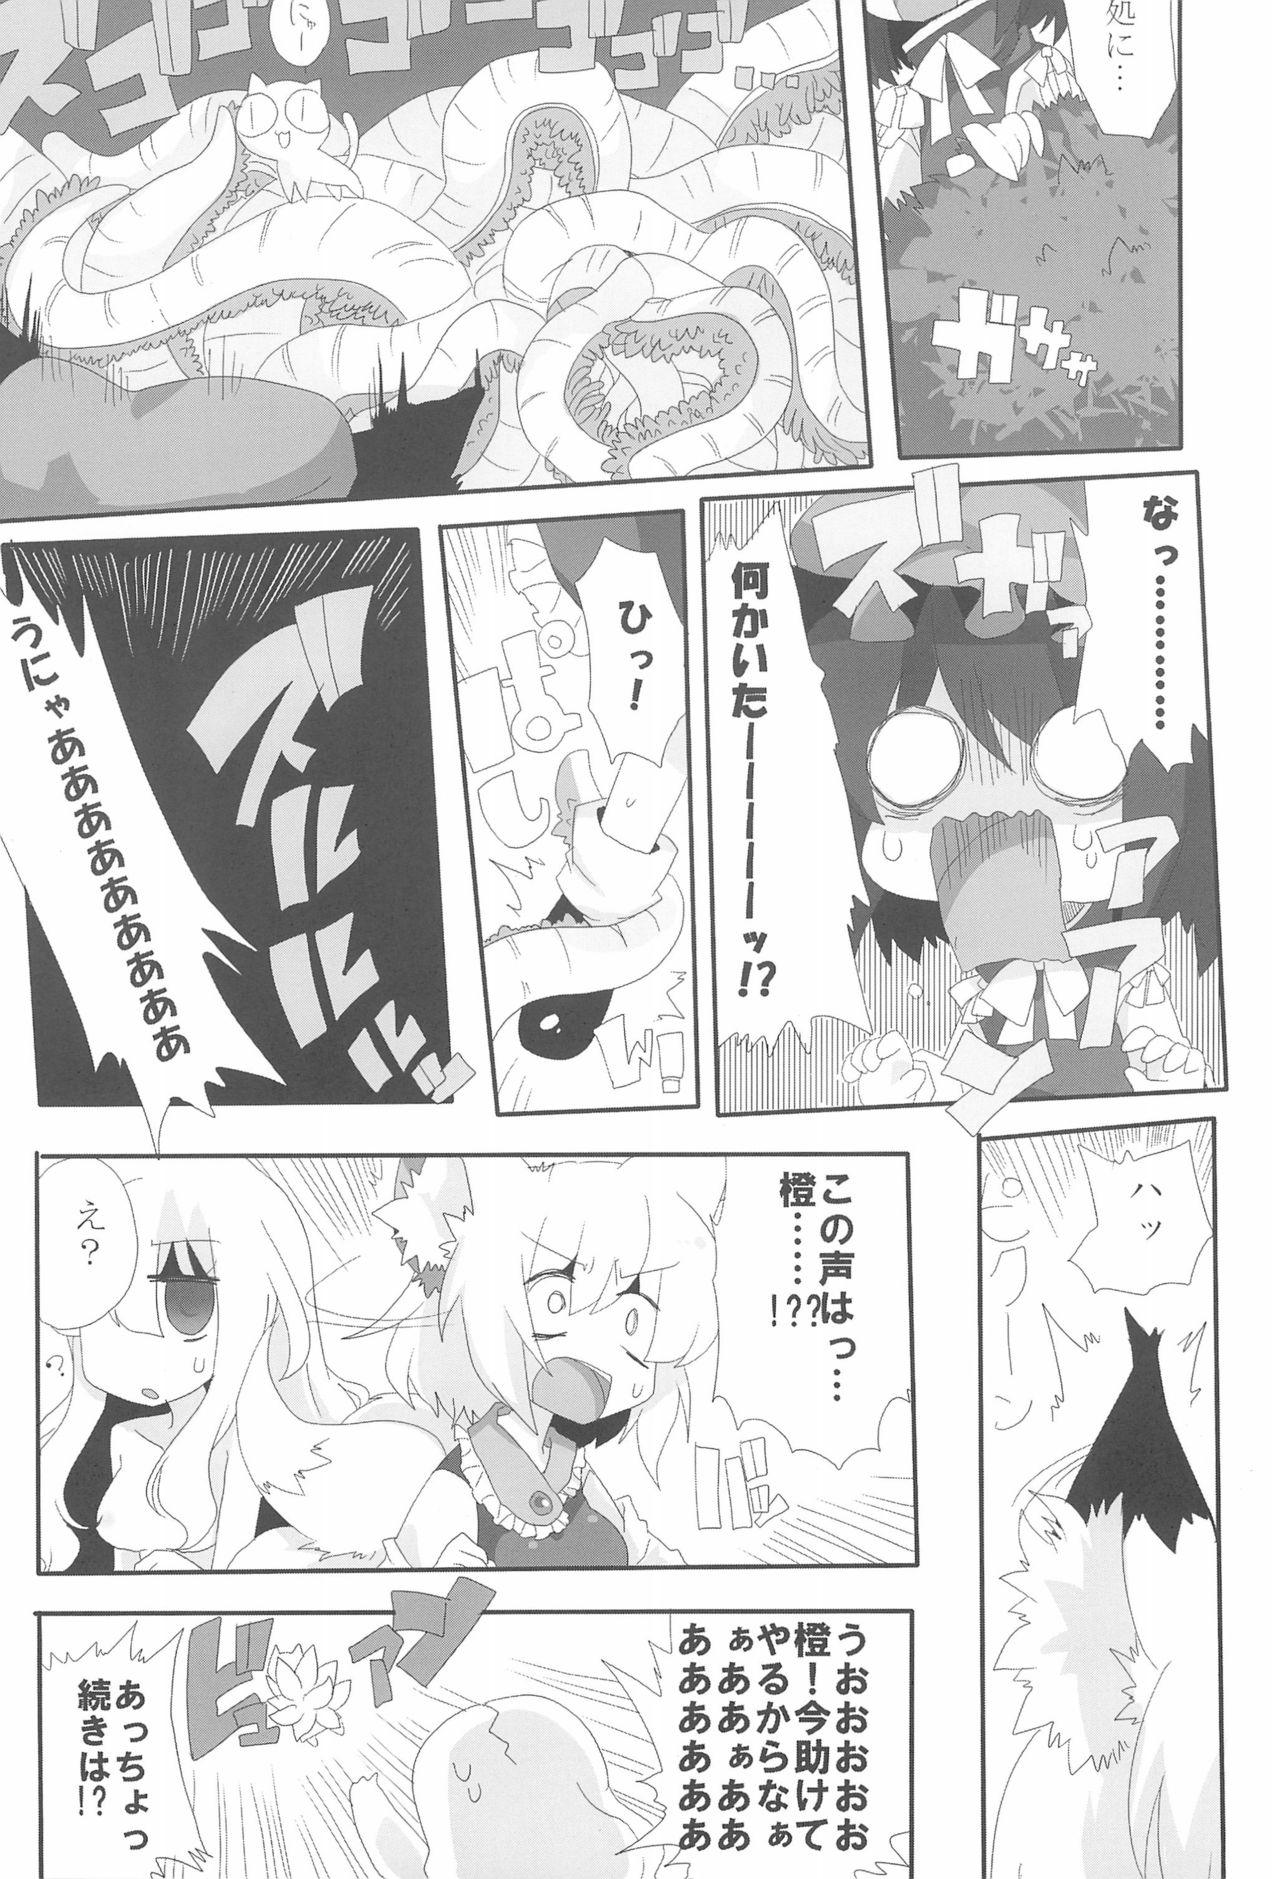 Pene NYAS! ATTRACTION - Touhou project Caseiro - Page 6